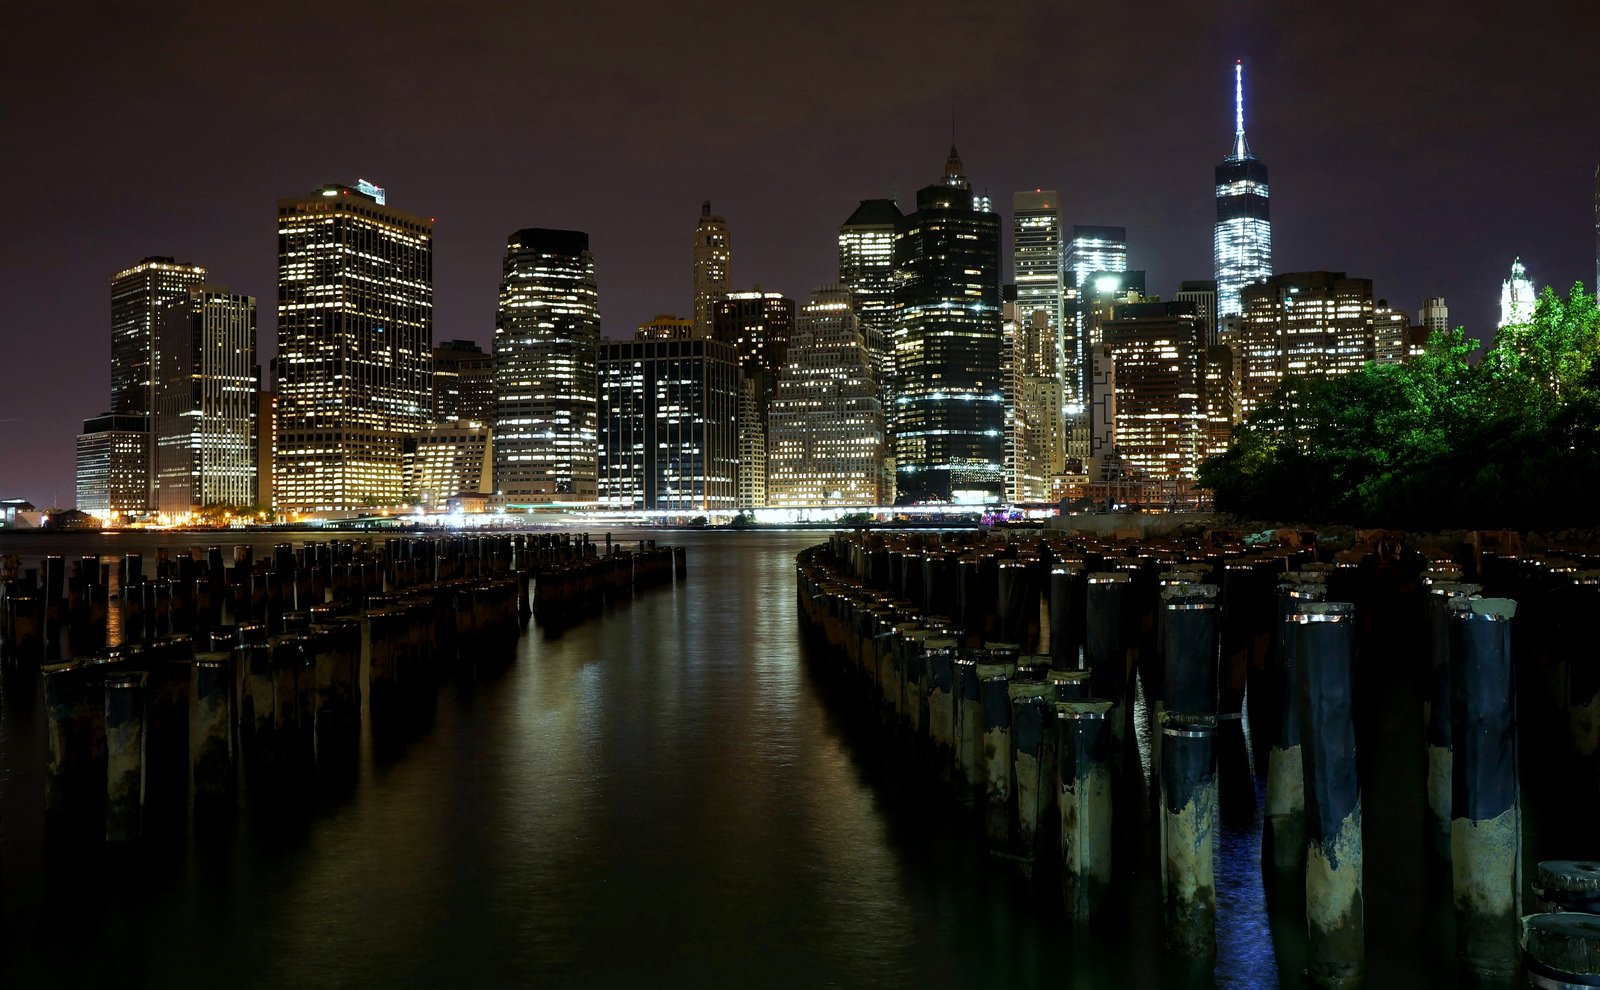 architecture, Buildings, Cities, Cityscape, Contrast, Empire, Lights, Night, Panorama, Place, Rivers, Scenic, Shift, Skyline, Skyscrapers, State, Tilt, View, Water, Window, World, New york, Nyc, Bridge, Brooklyn Wallpaper